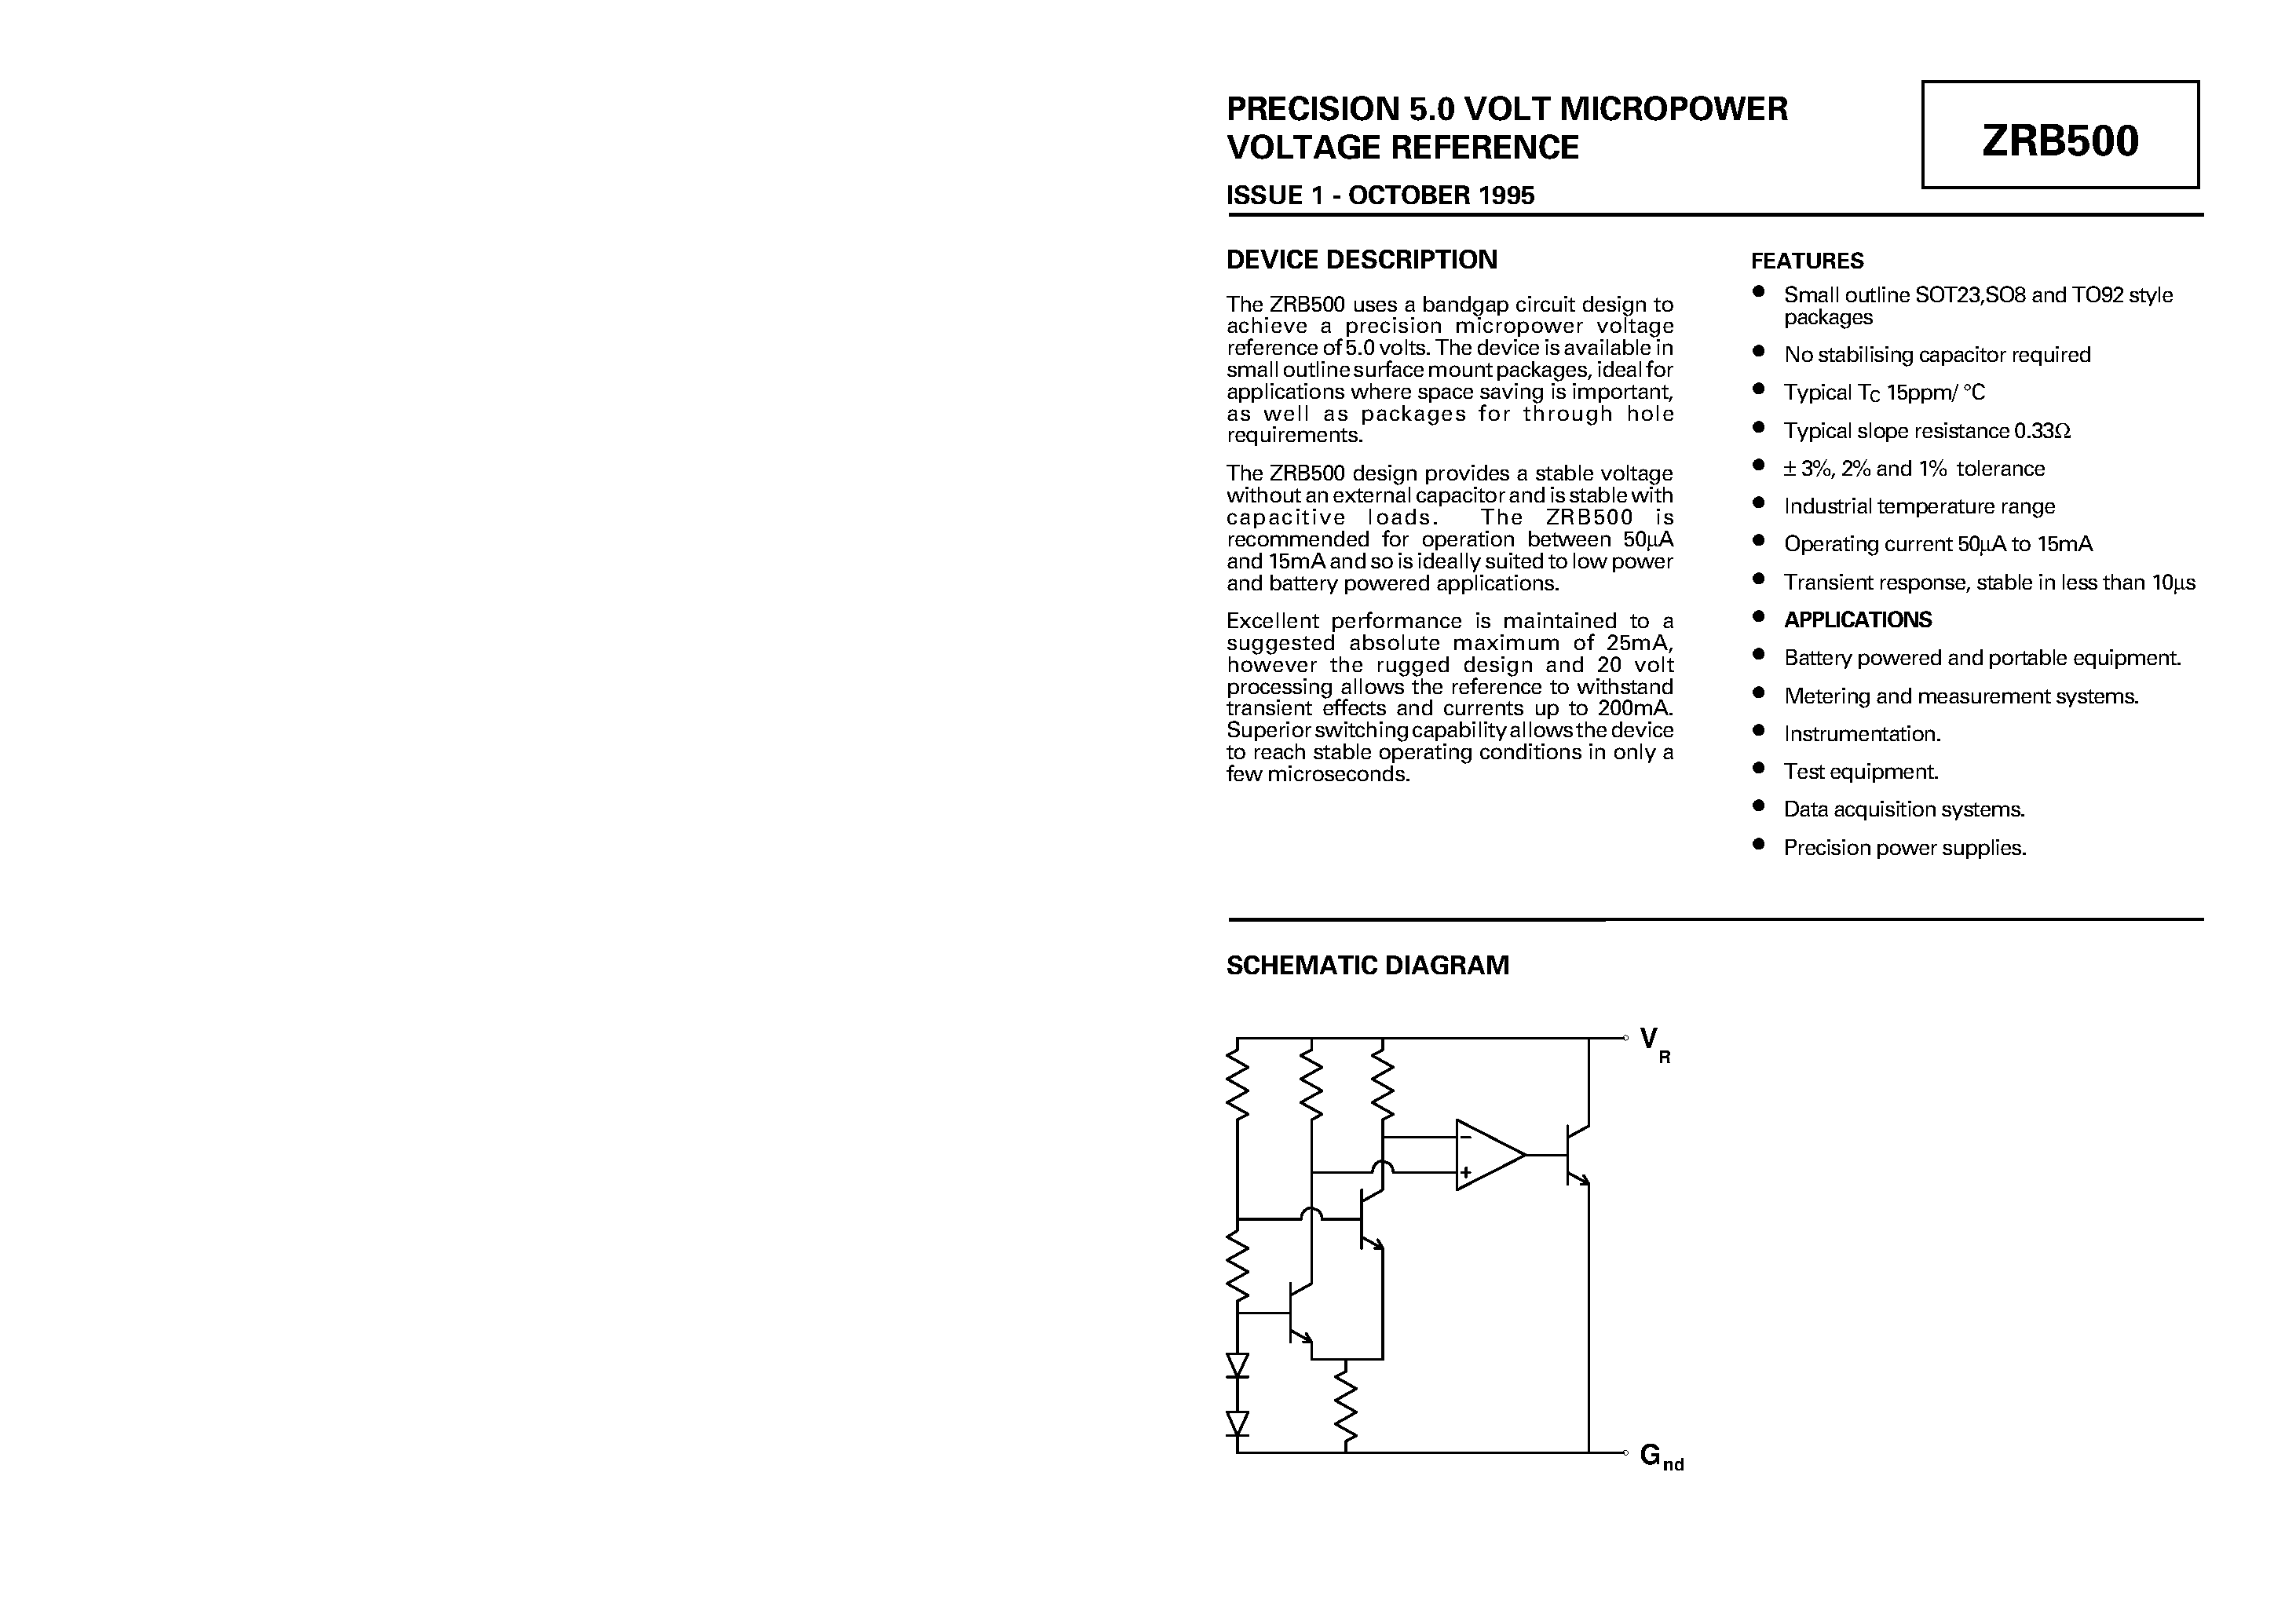 Datasheet ZRB500F01 - PRECISION 5.0 VOLT MICROPOWER VOLTAGE REFERENCE page 1